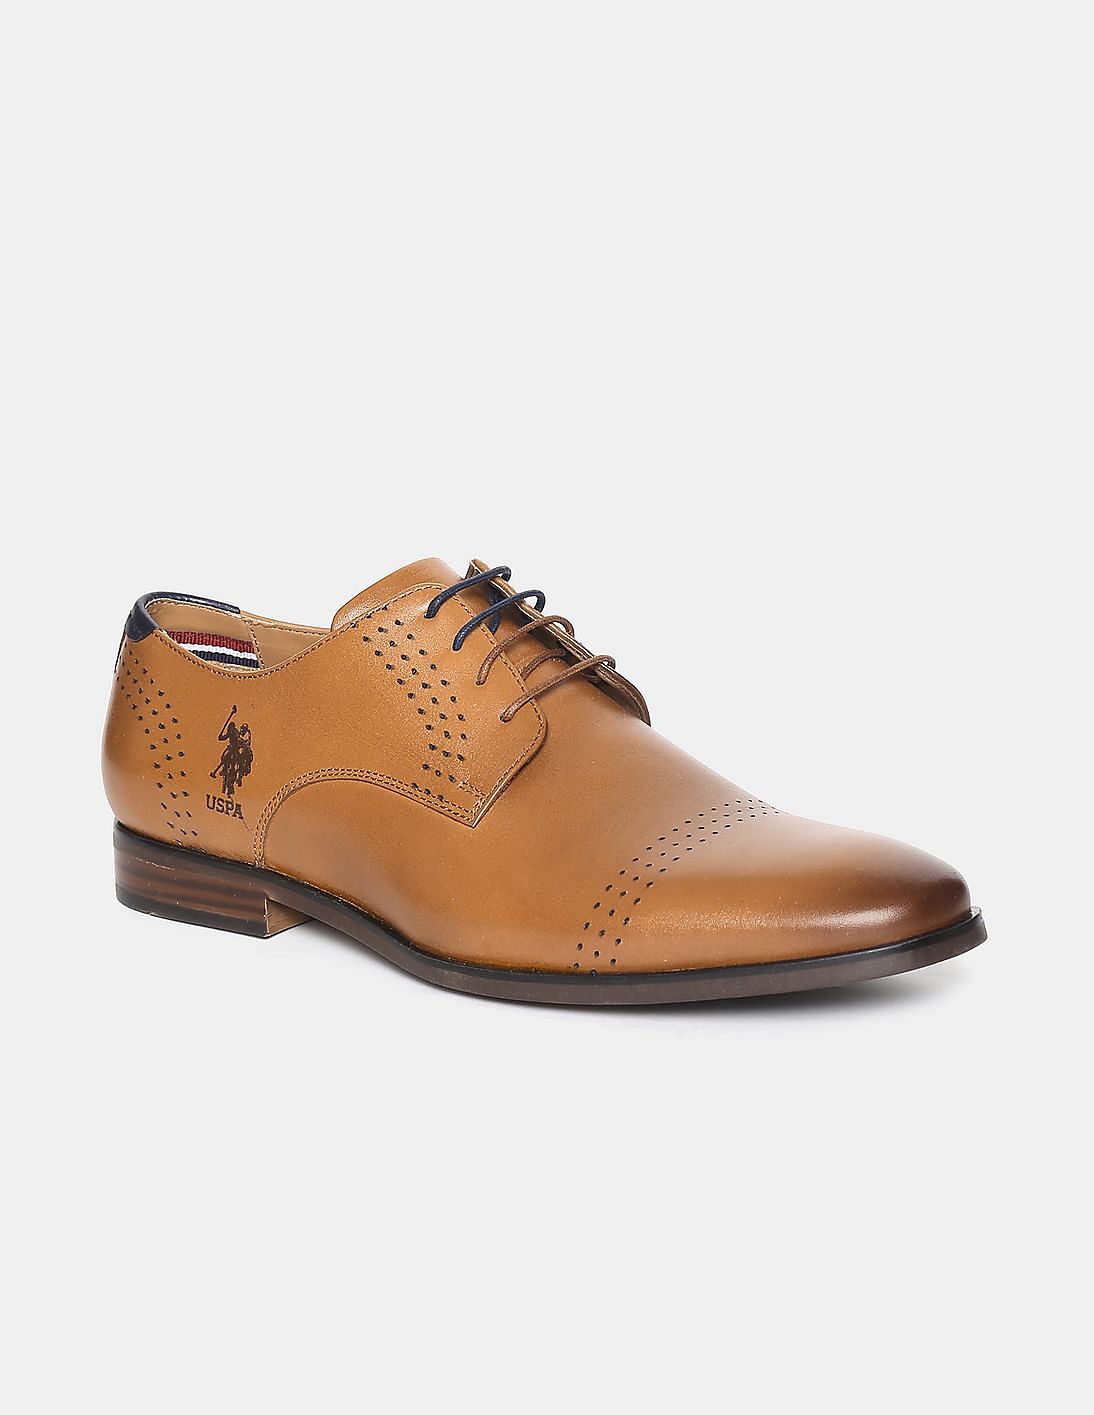 Buy U.S. Polo Assn. Men Men Brown Burnished Leather Perforated Derby